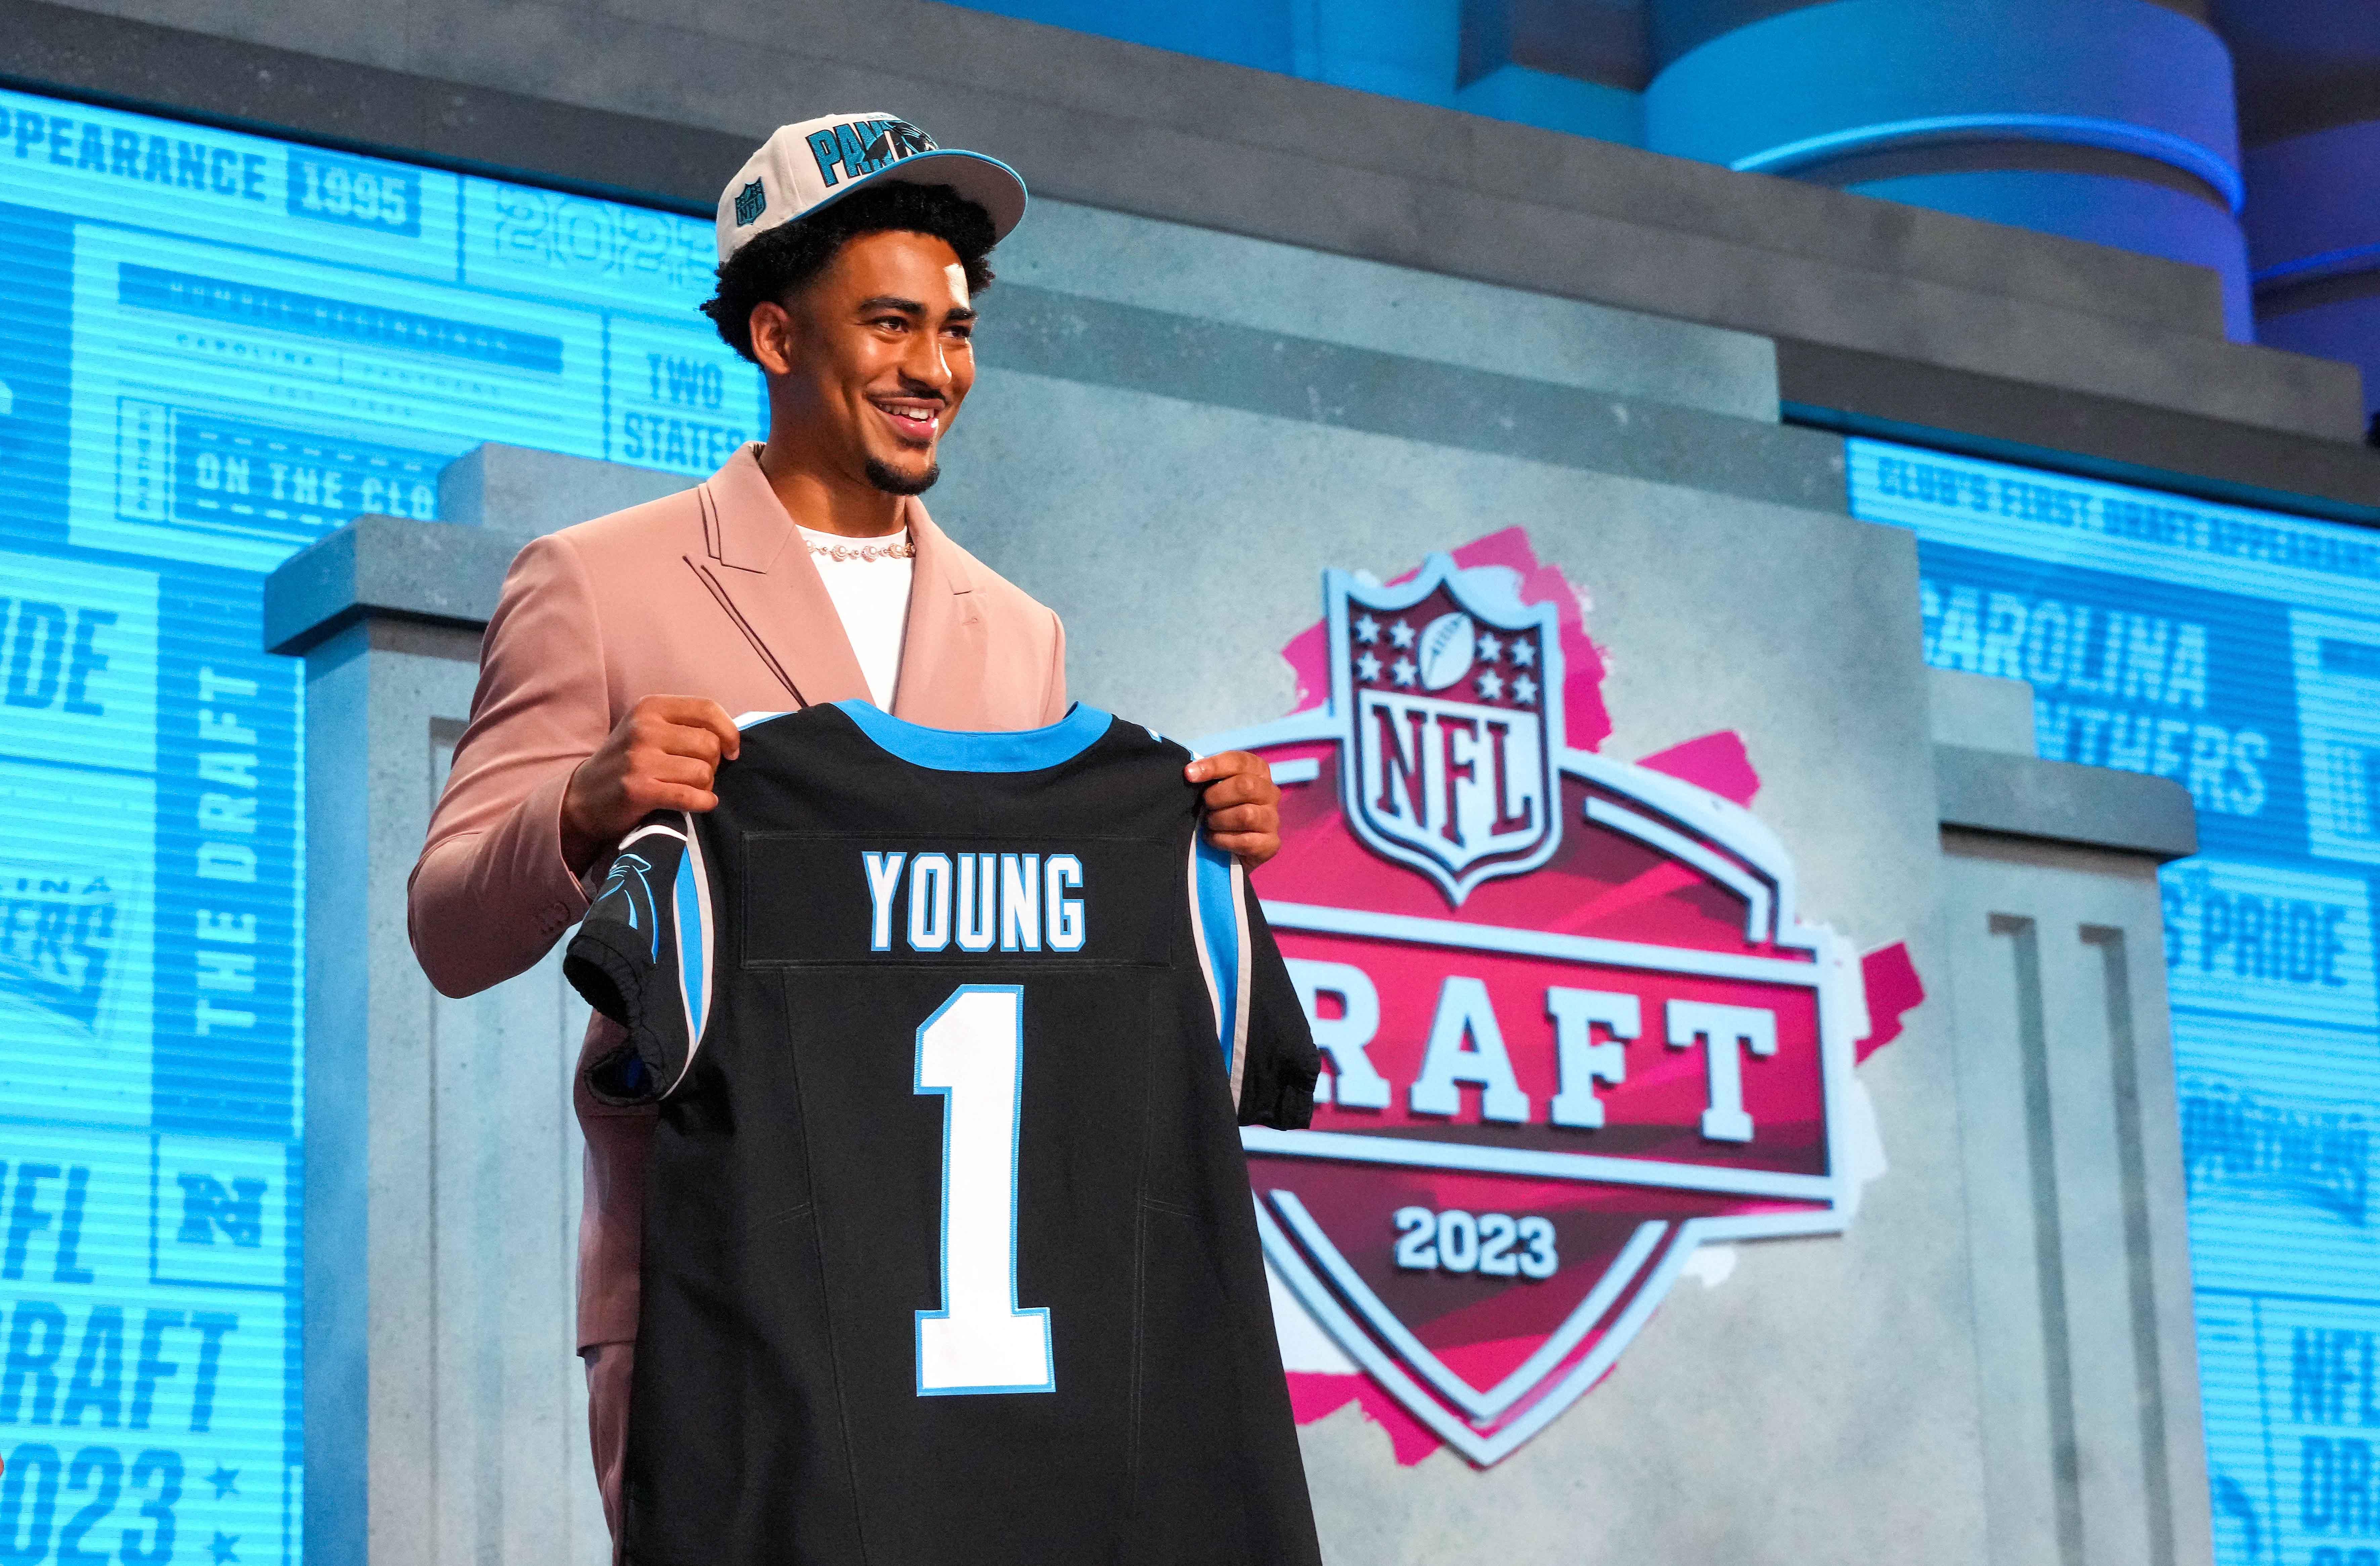 2023 NFL Draft tracker Day 2: Draft order and top moments from Rounds 2-3